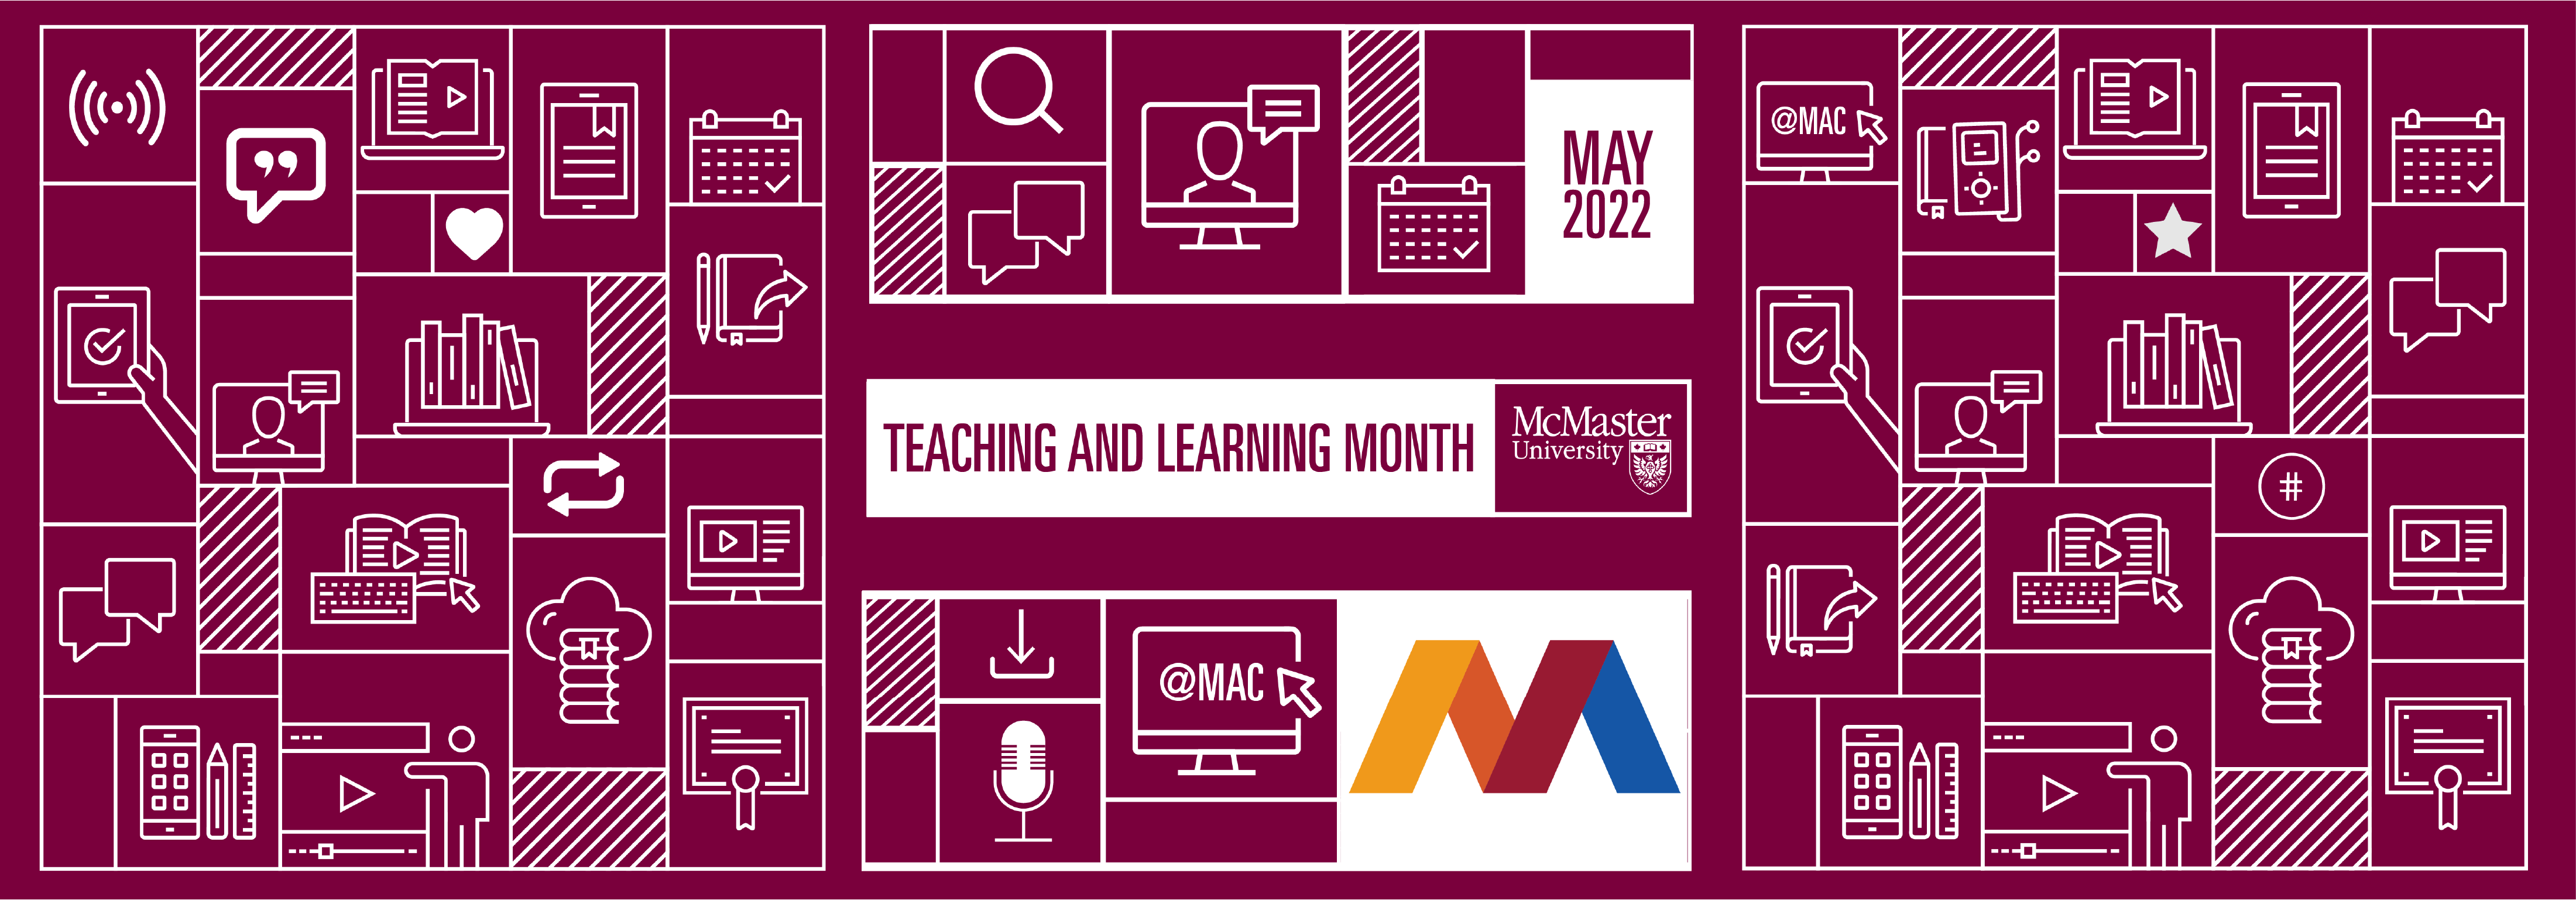 Graphic image containing icons relating to teaching and learning themes with MacPherson Institute logo